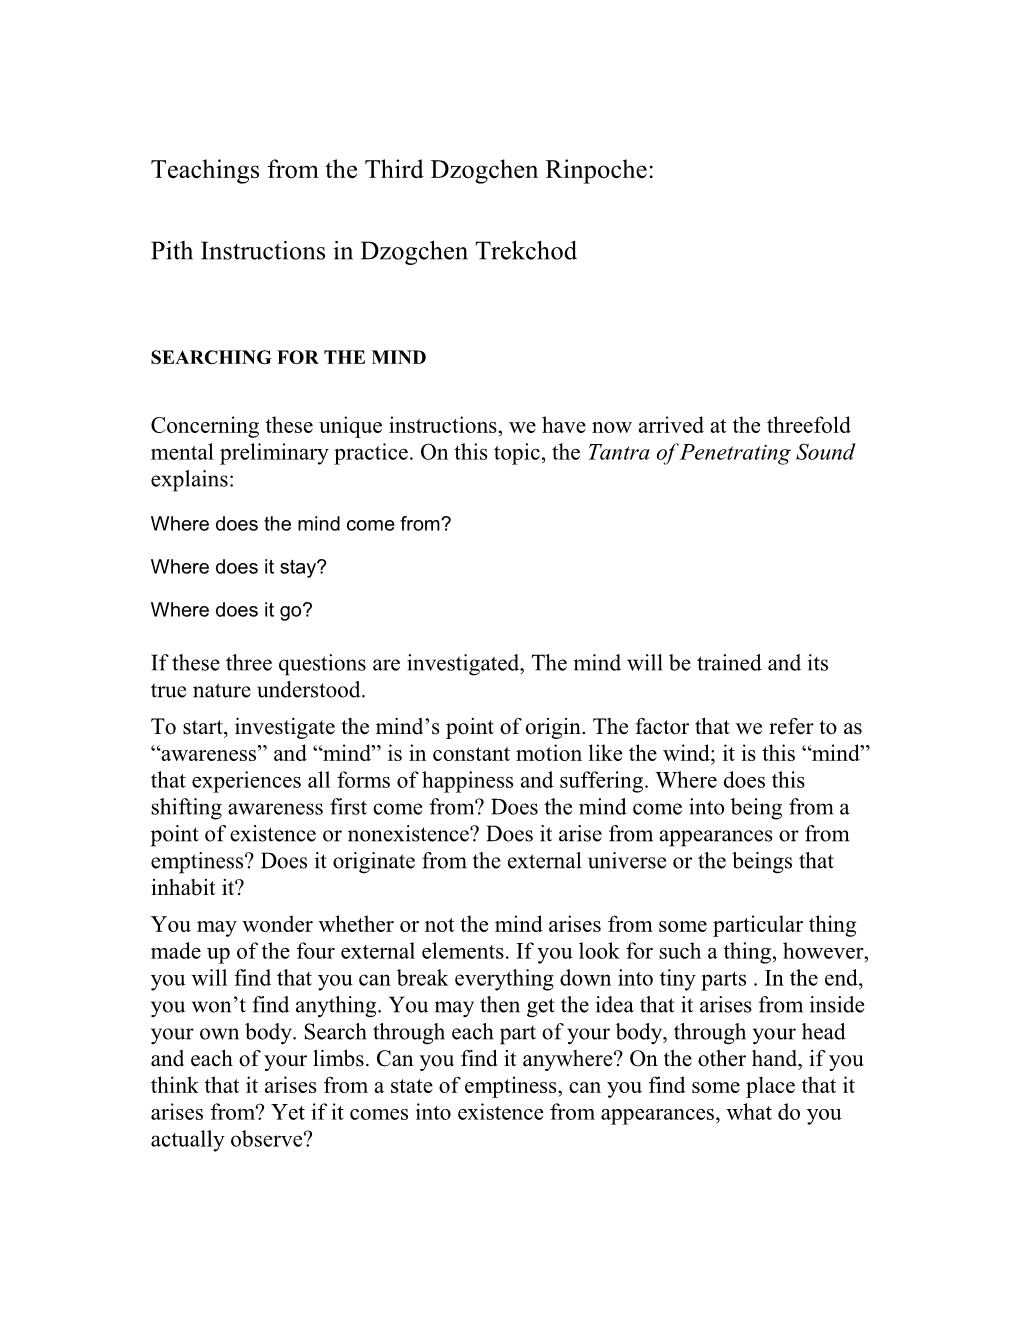 Here Are Two Textual Excerpts from the the Third Dzogchen Rinpoche